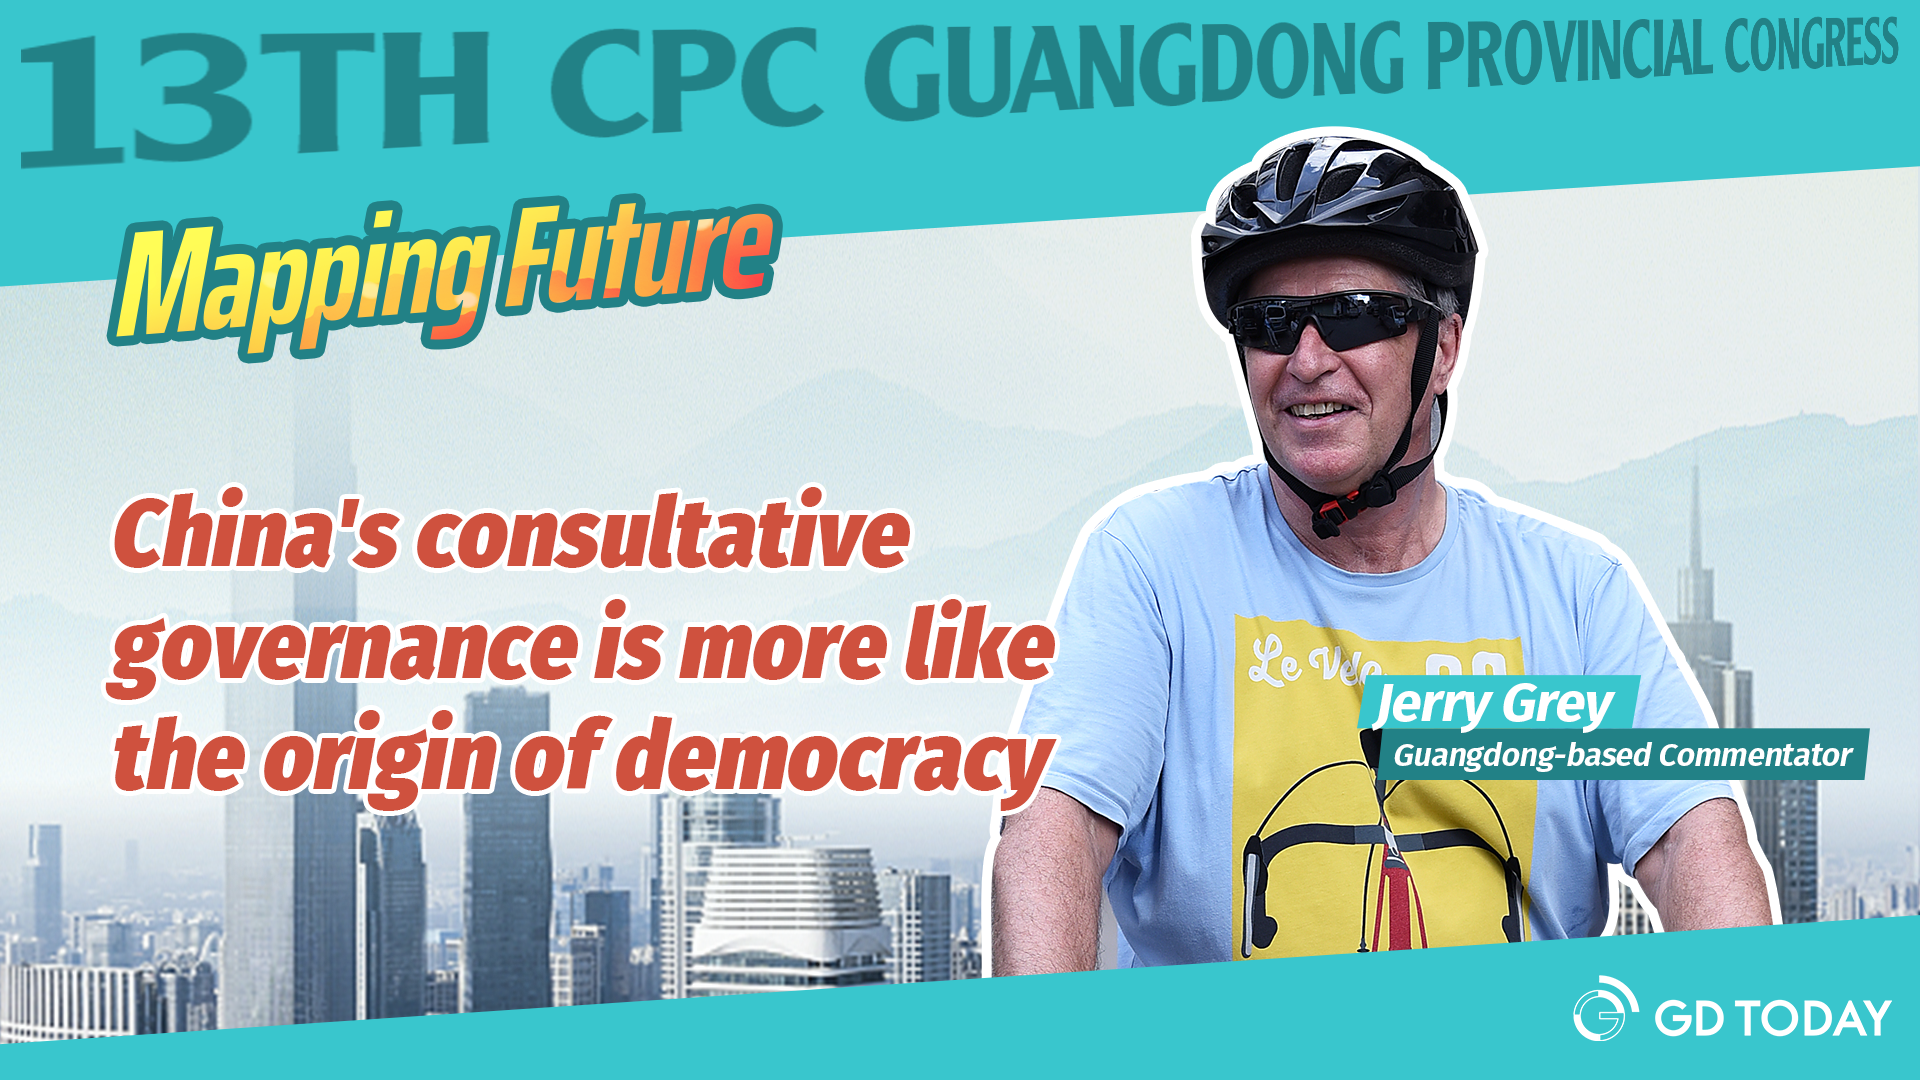 China's consultative governance is more like the origin of democracy: Jerry Grey